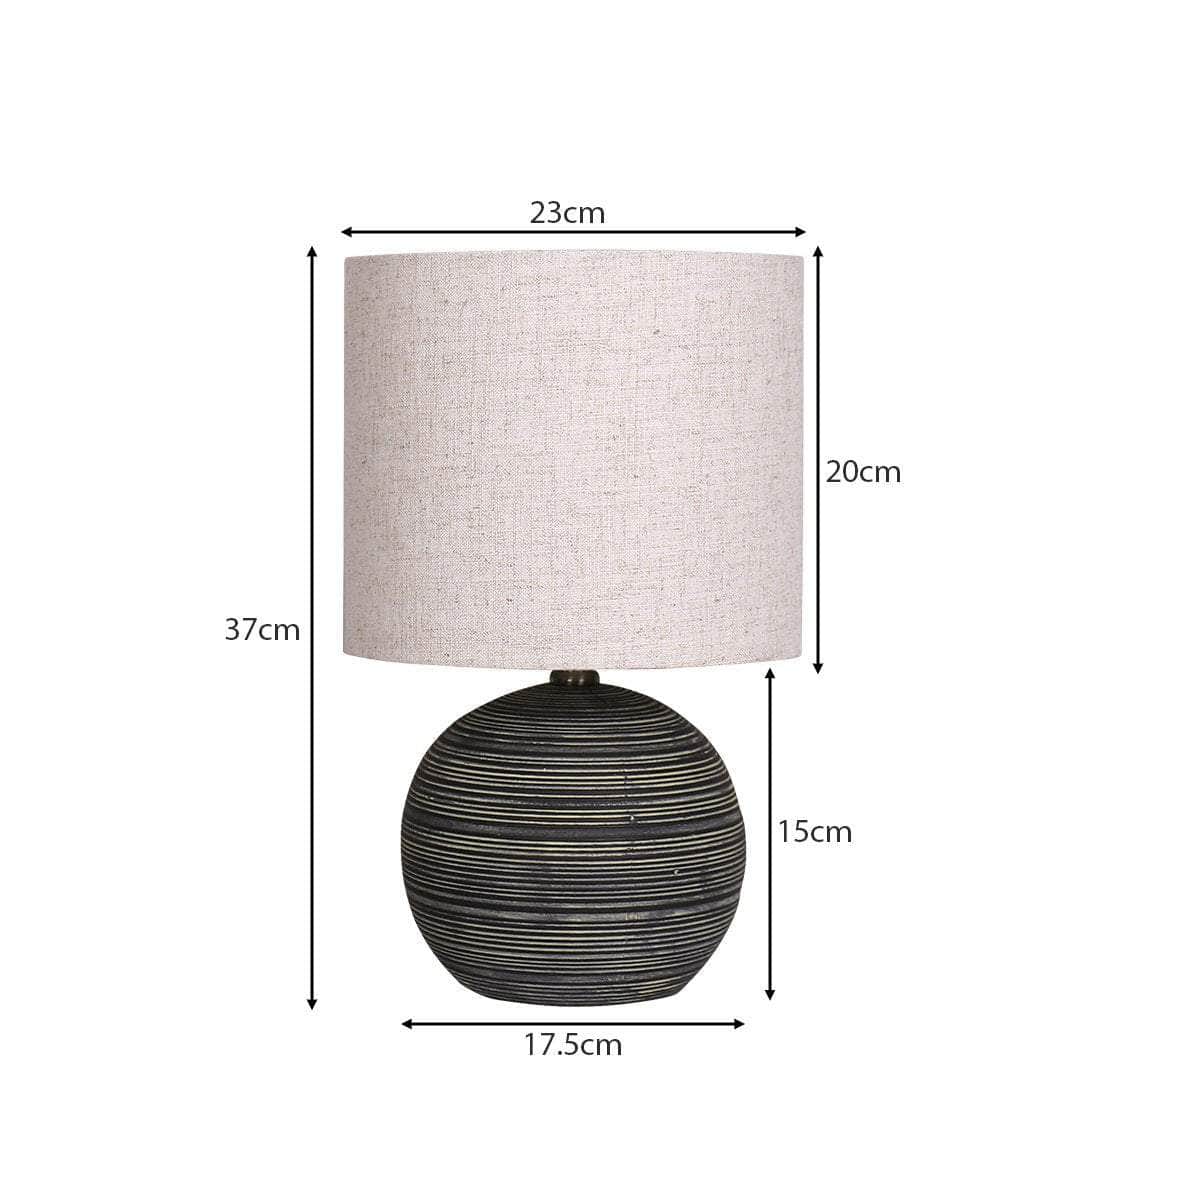 Chic Stripes Ceramic Table Lamp with Striped Pattern